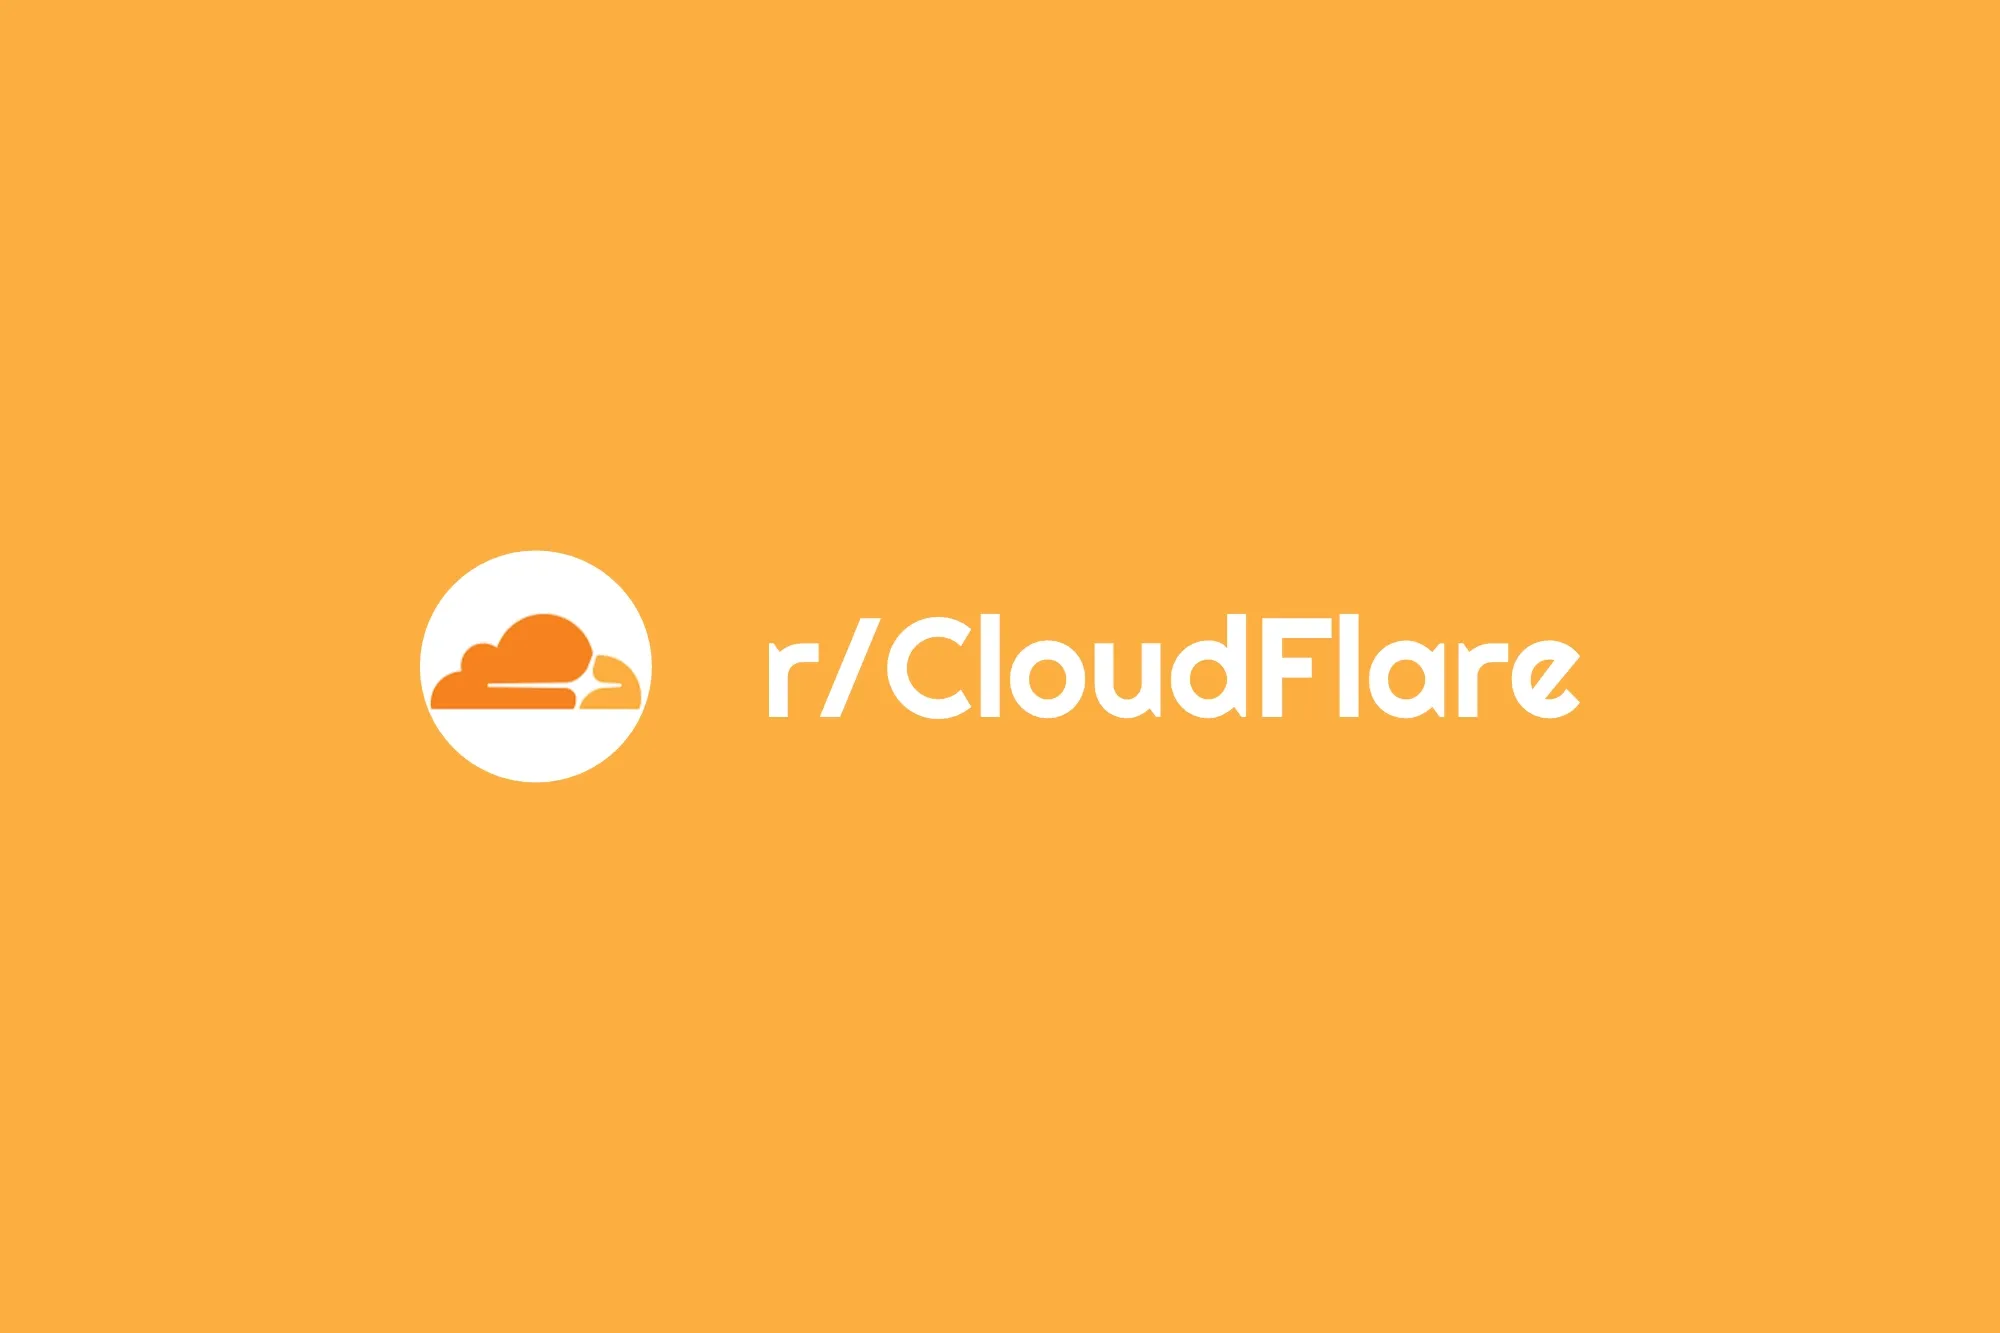 r/CloudFlare: How to I get cloudflare tunnel to accept localhost/nextcloud as a service URL?